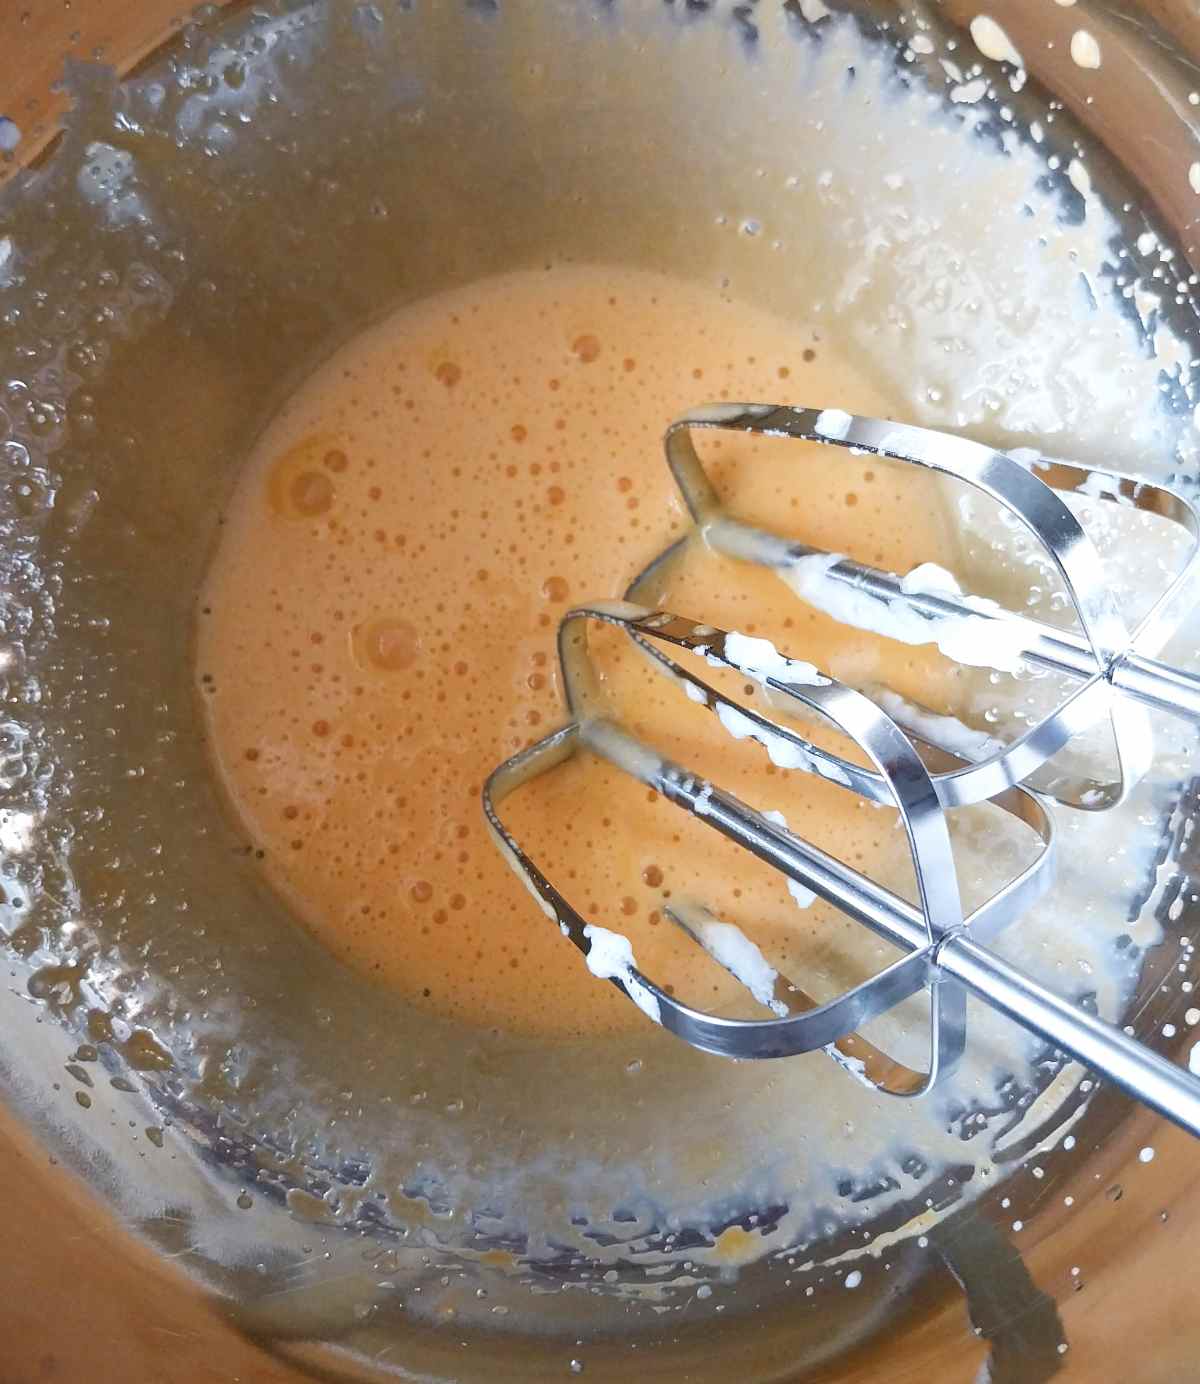 Whipped egg yolks in a metal bowl.